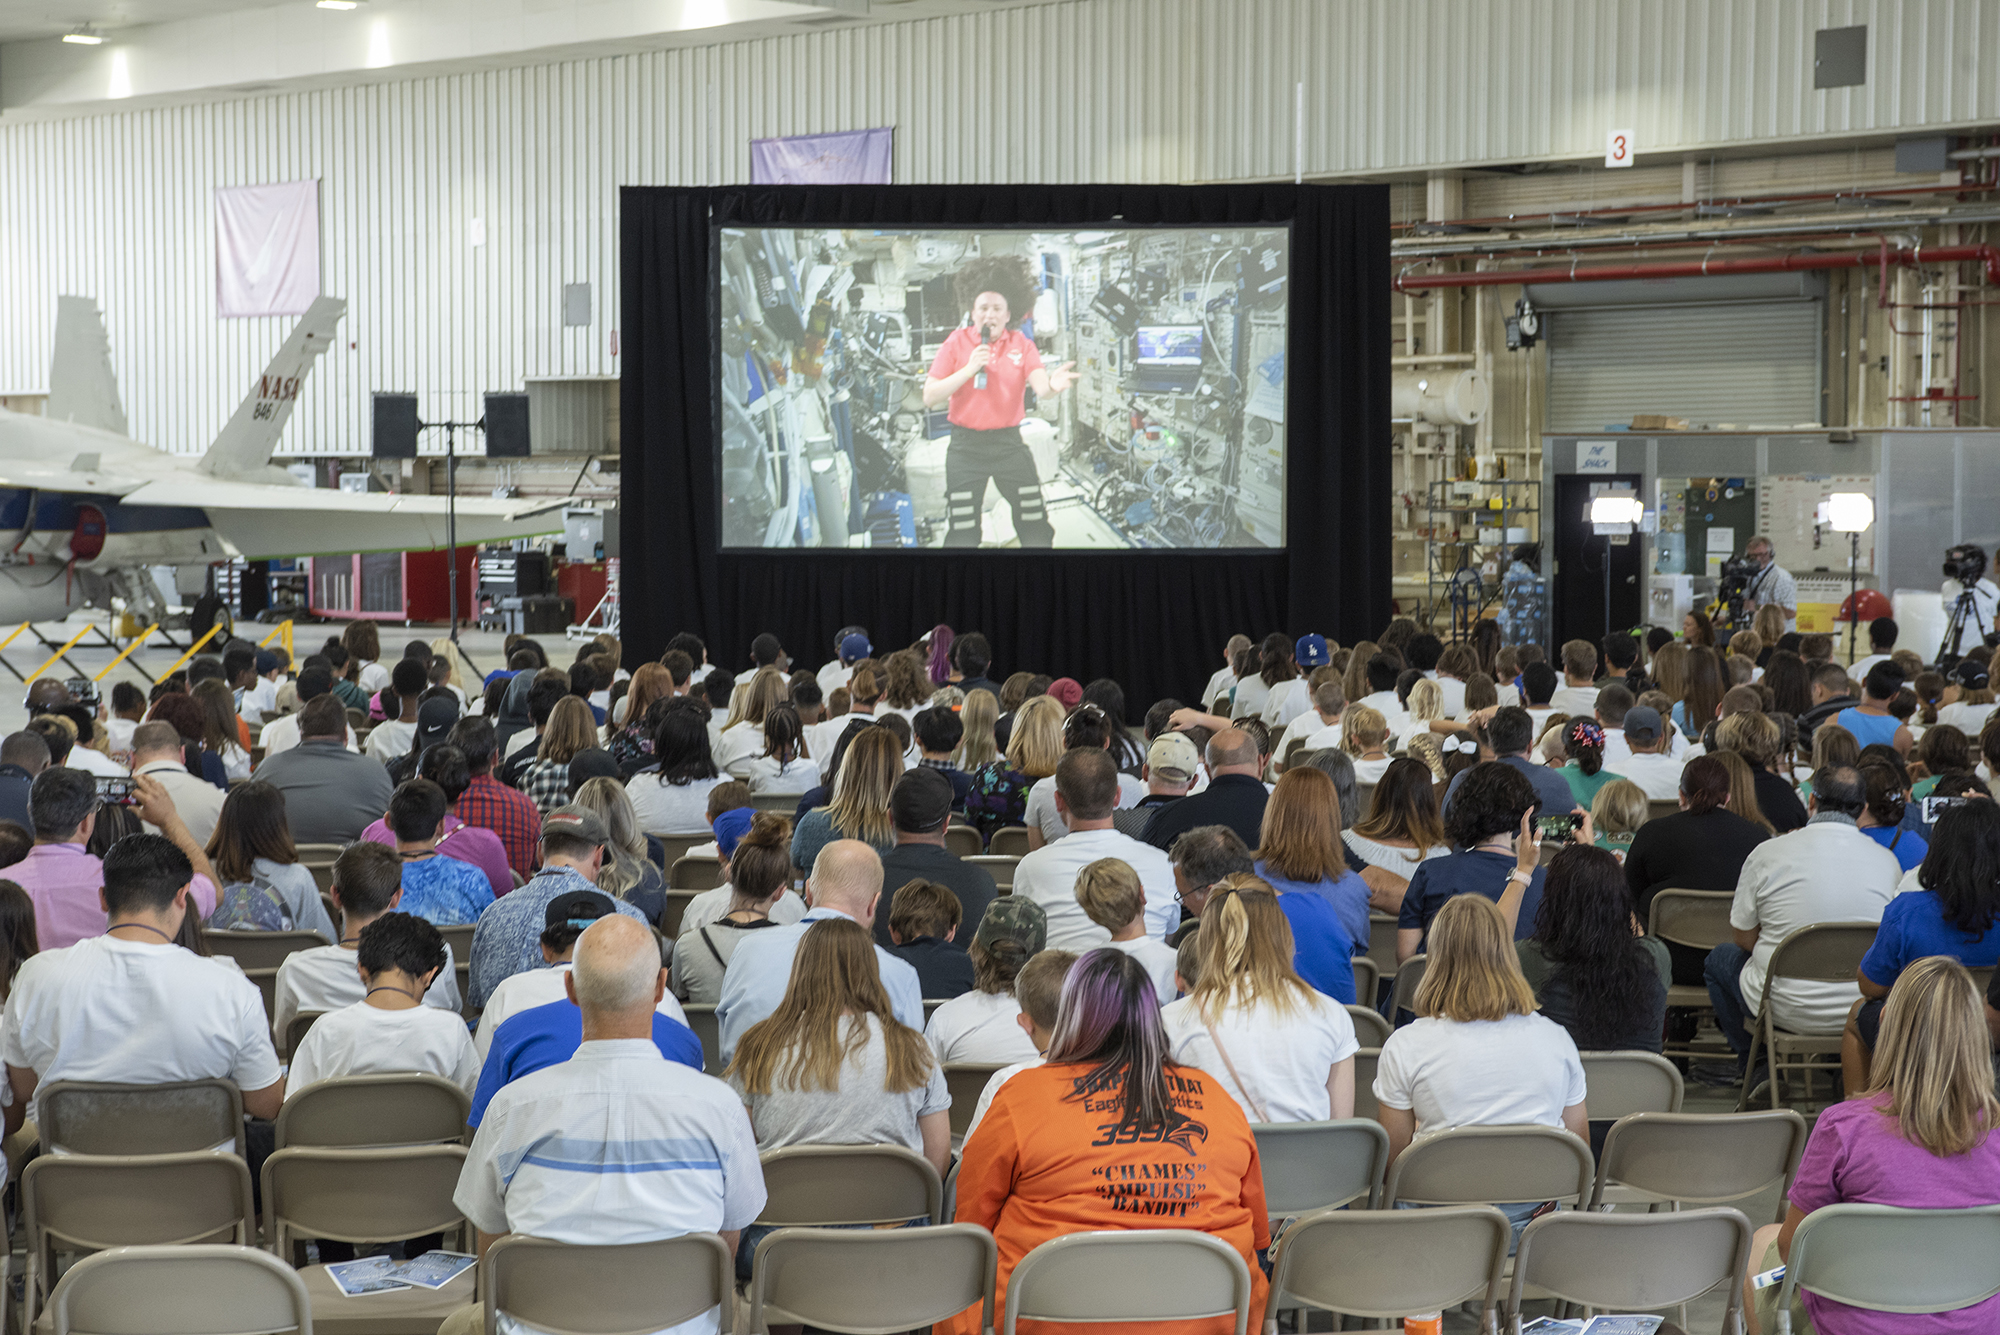 Over 300 students watch as Serena M. Aunon- Chancellor answer questions from the ISS.